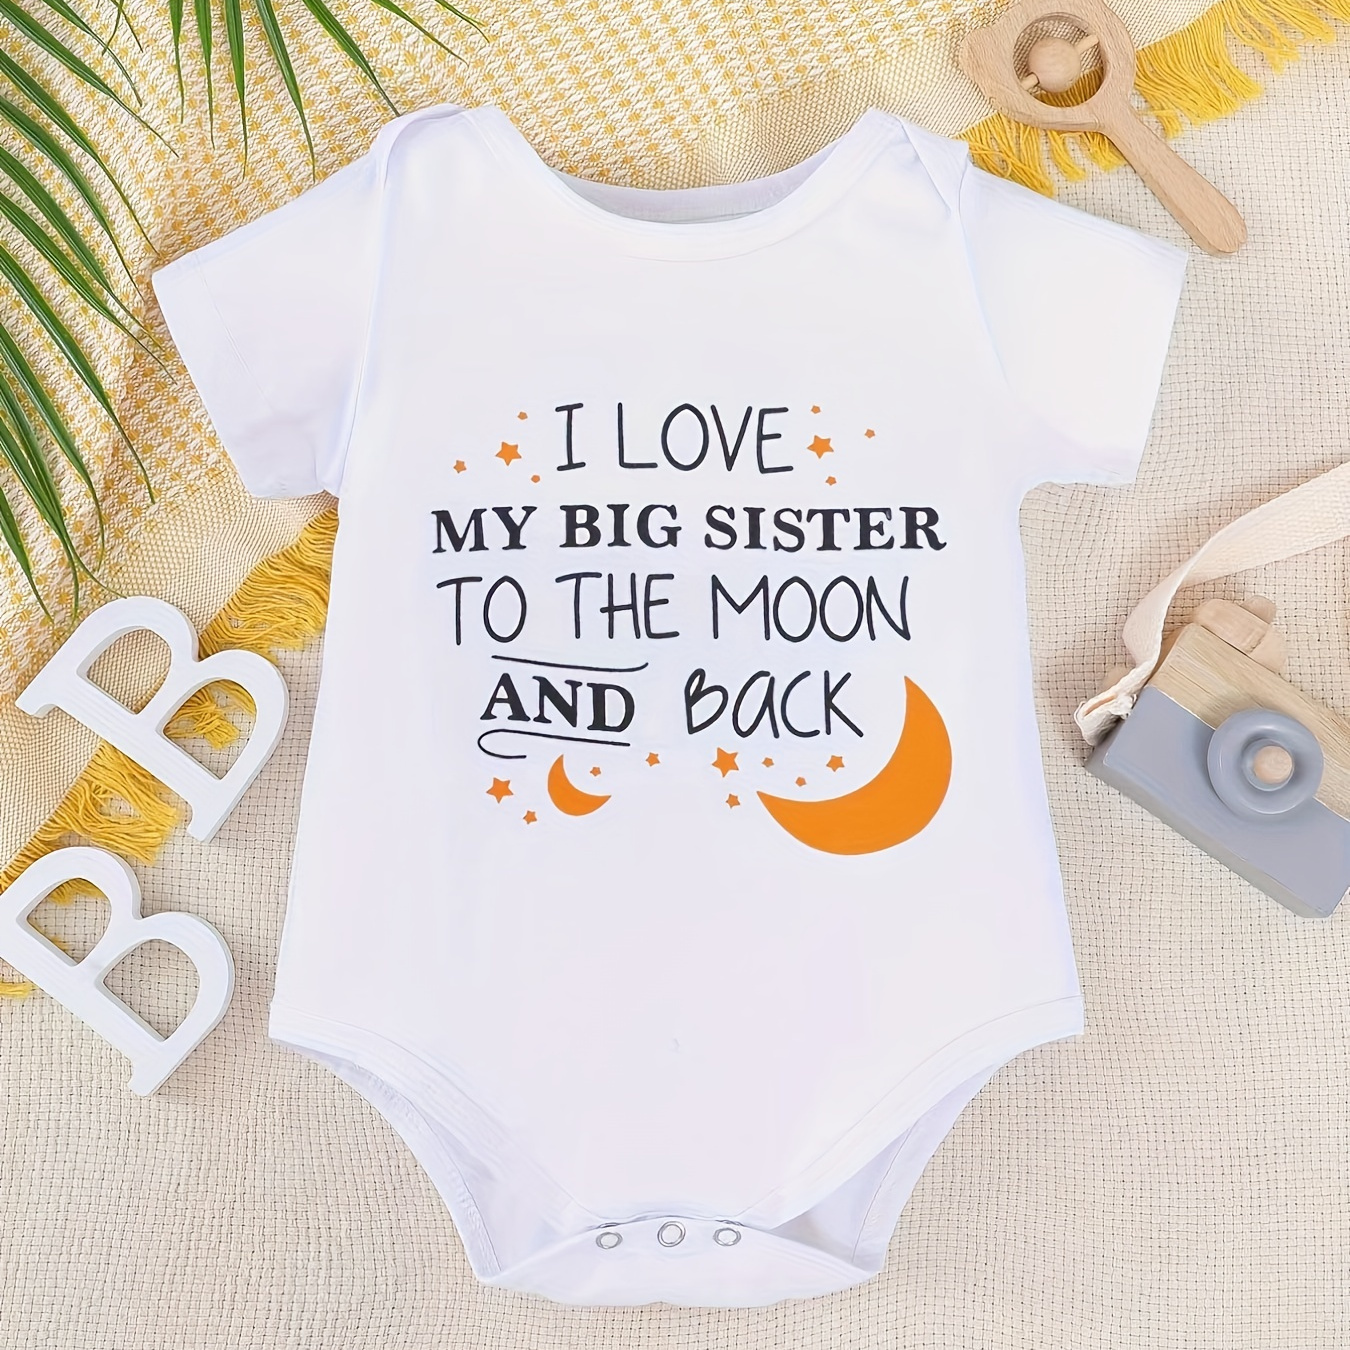 

i Love My Big Sister To The Moon And Back" Onesie, Short Sleeves Summer Onesie, Soft Comfortable Breathable Baby Clothes